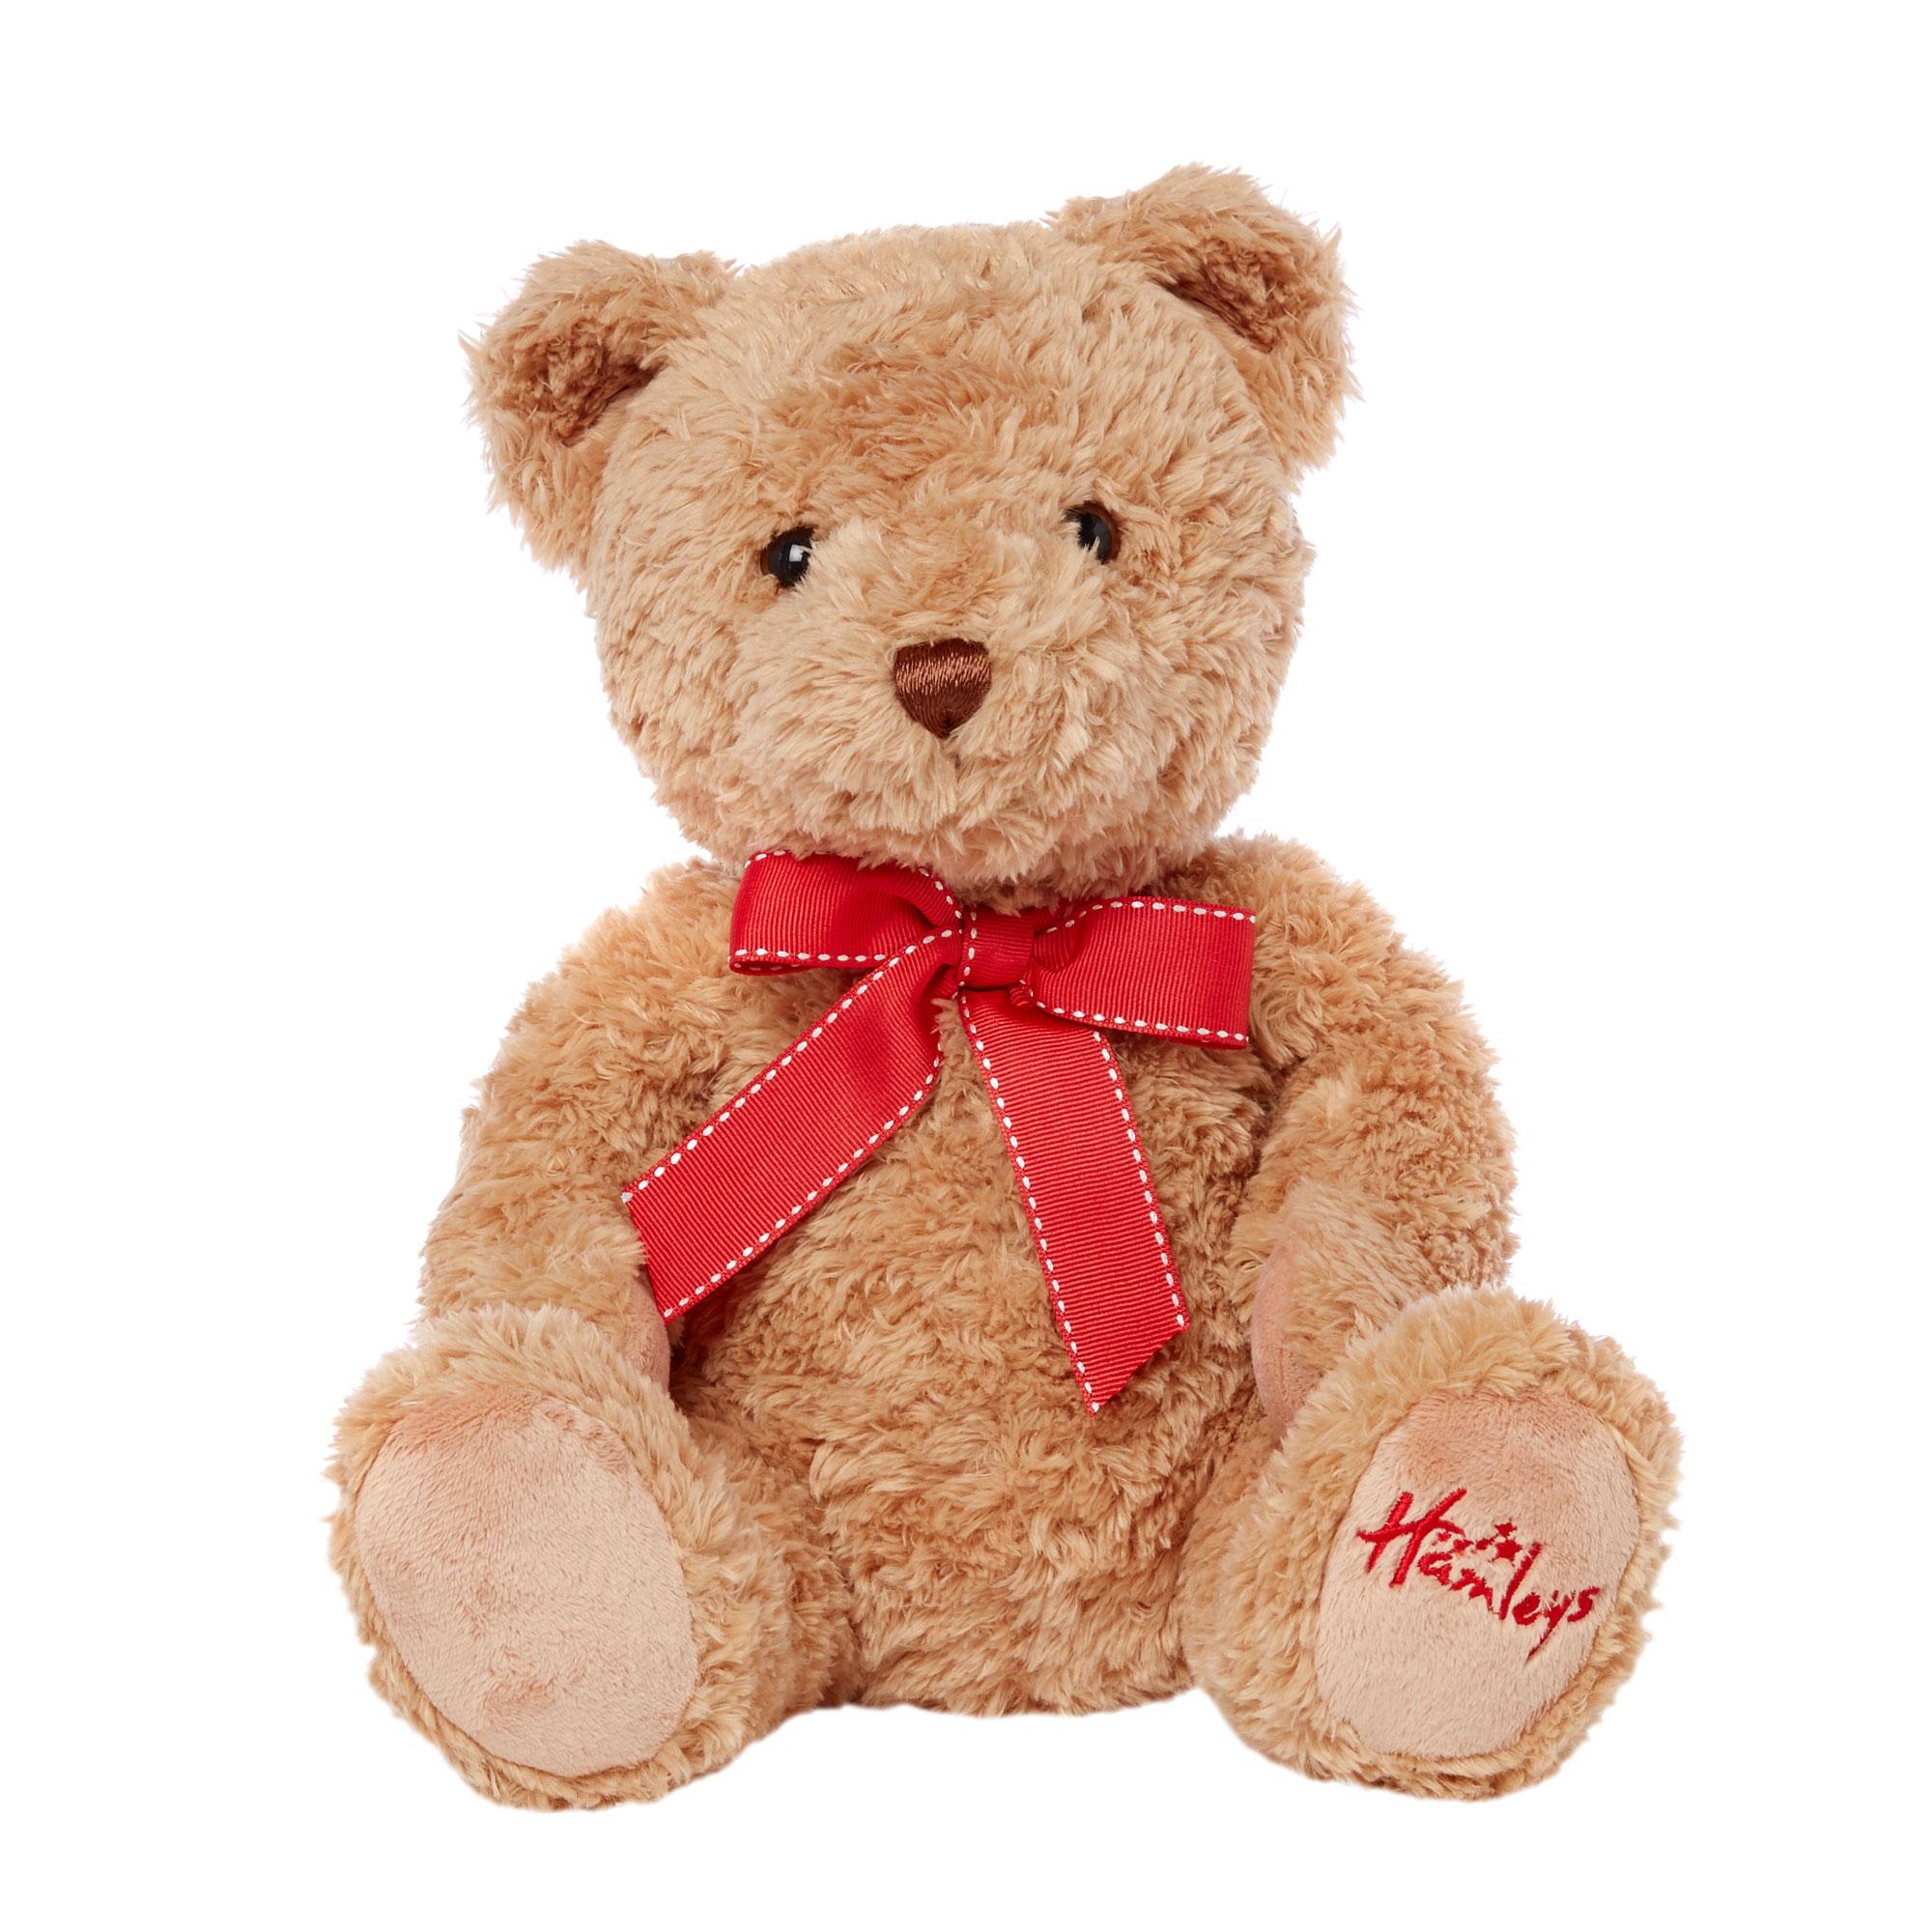 Teddy bear pictures